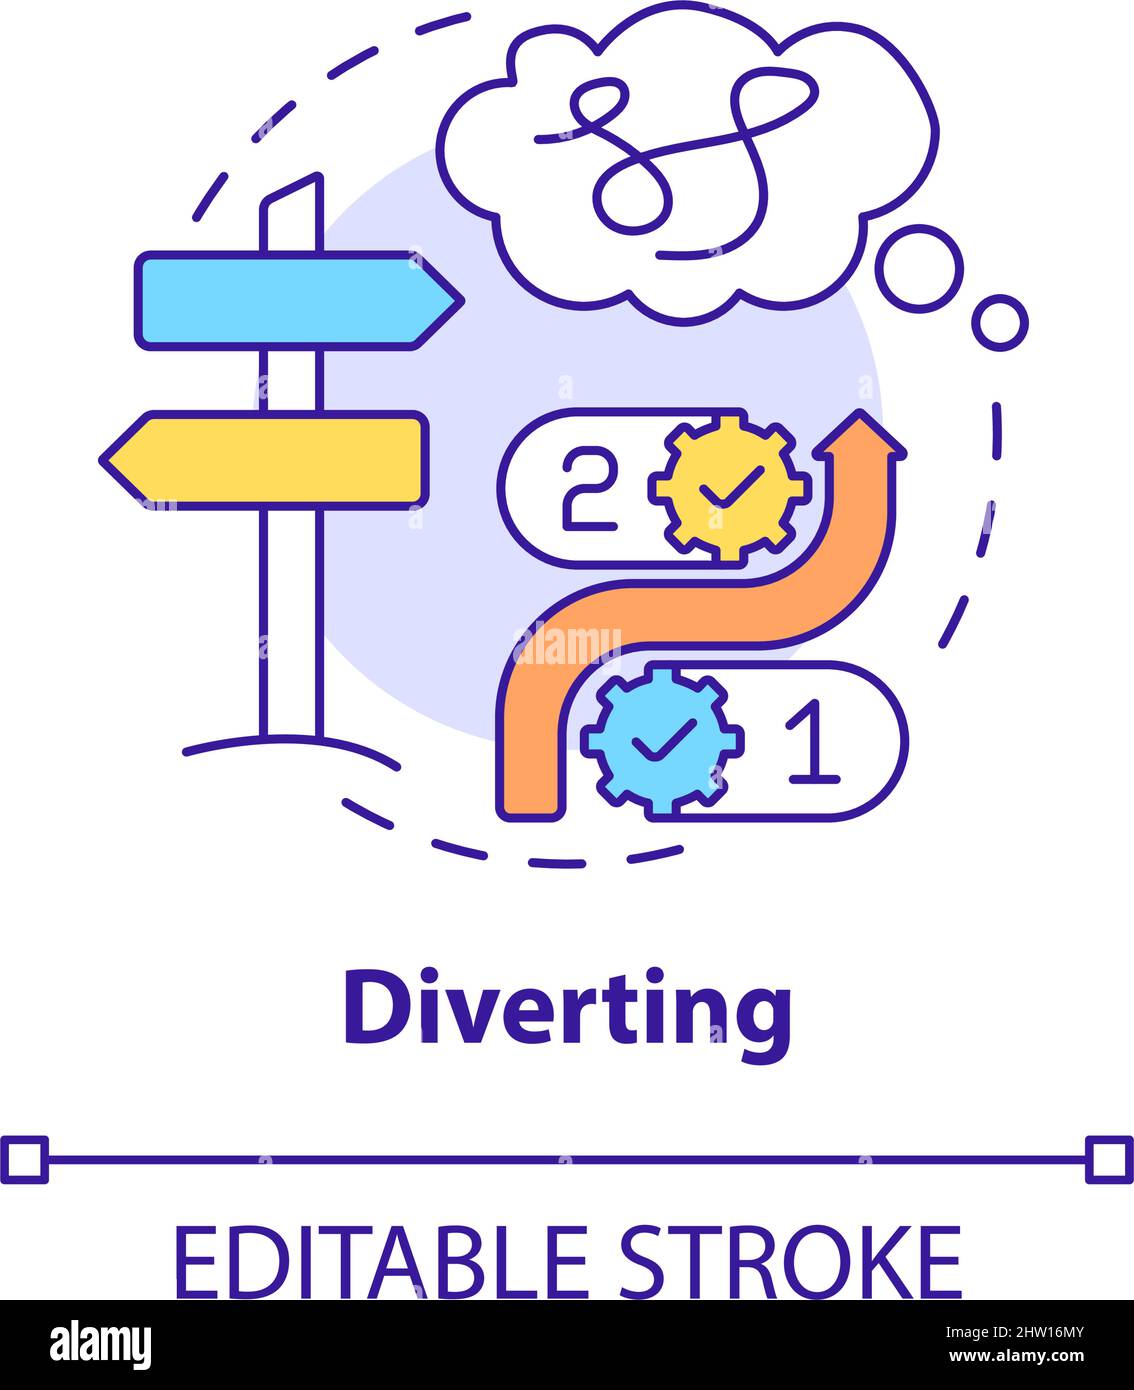 Diverting concept icon Stock Vector